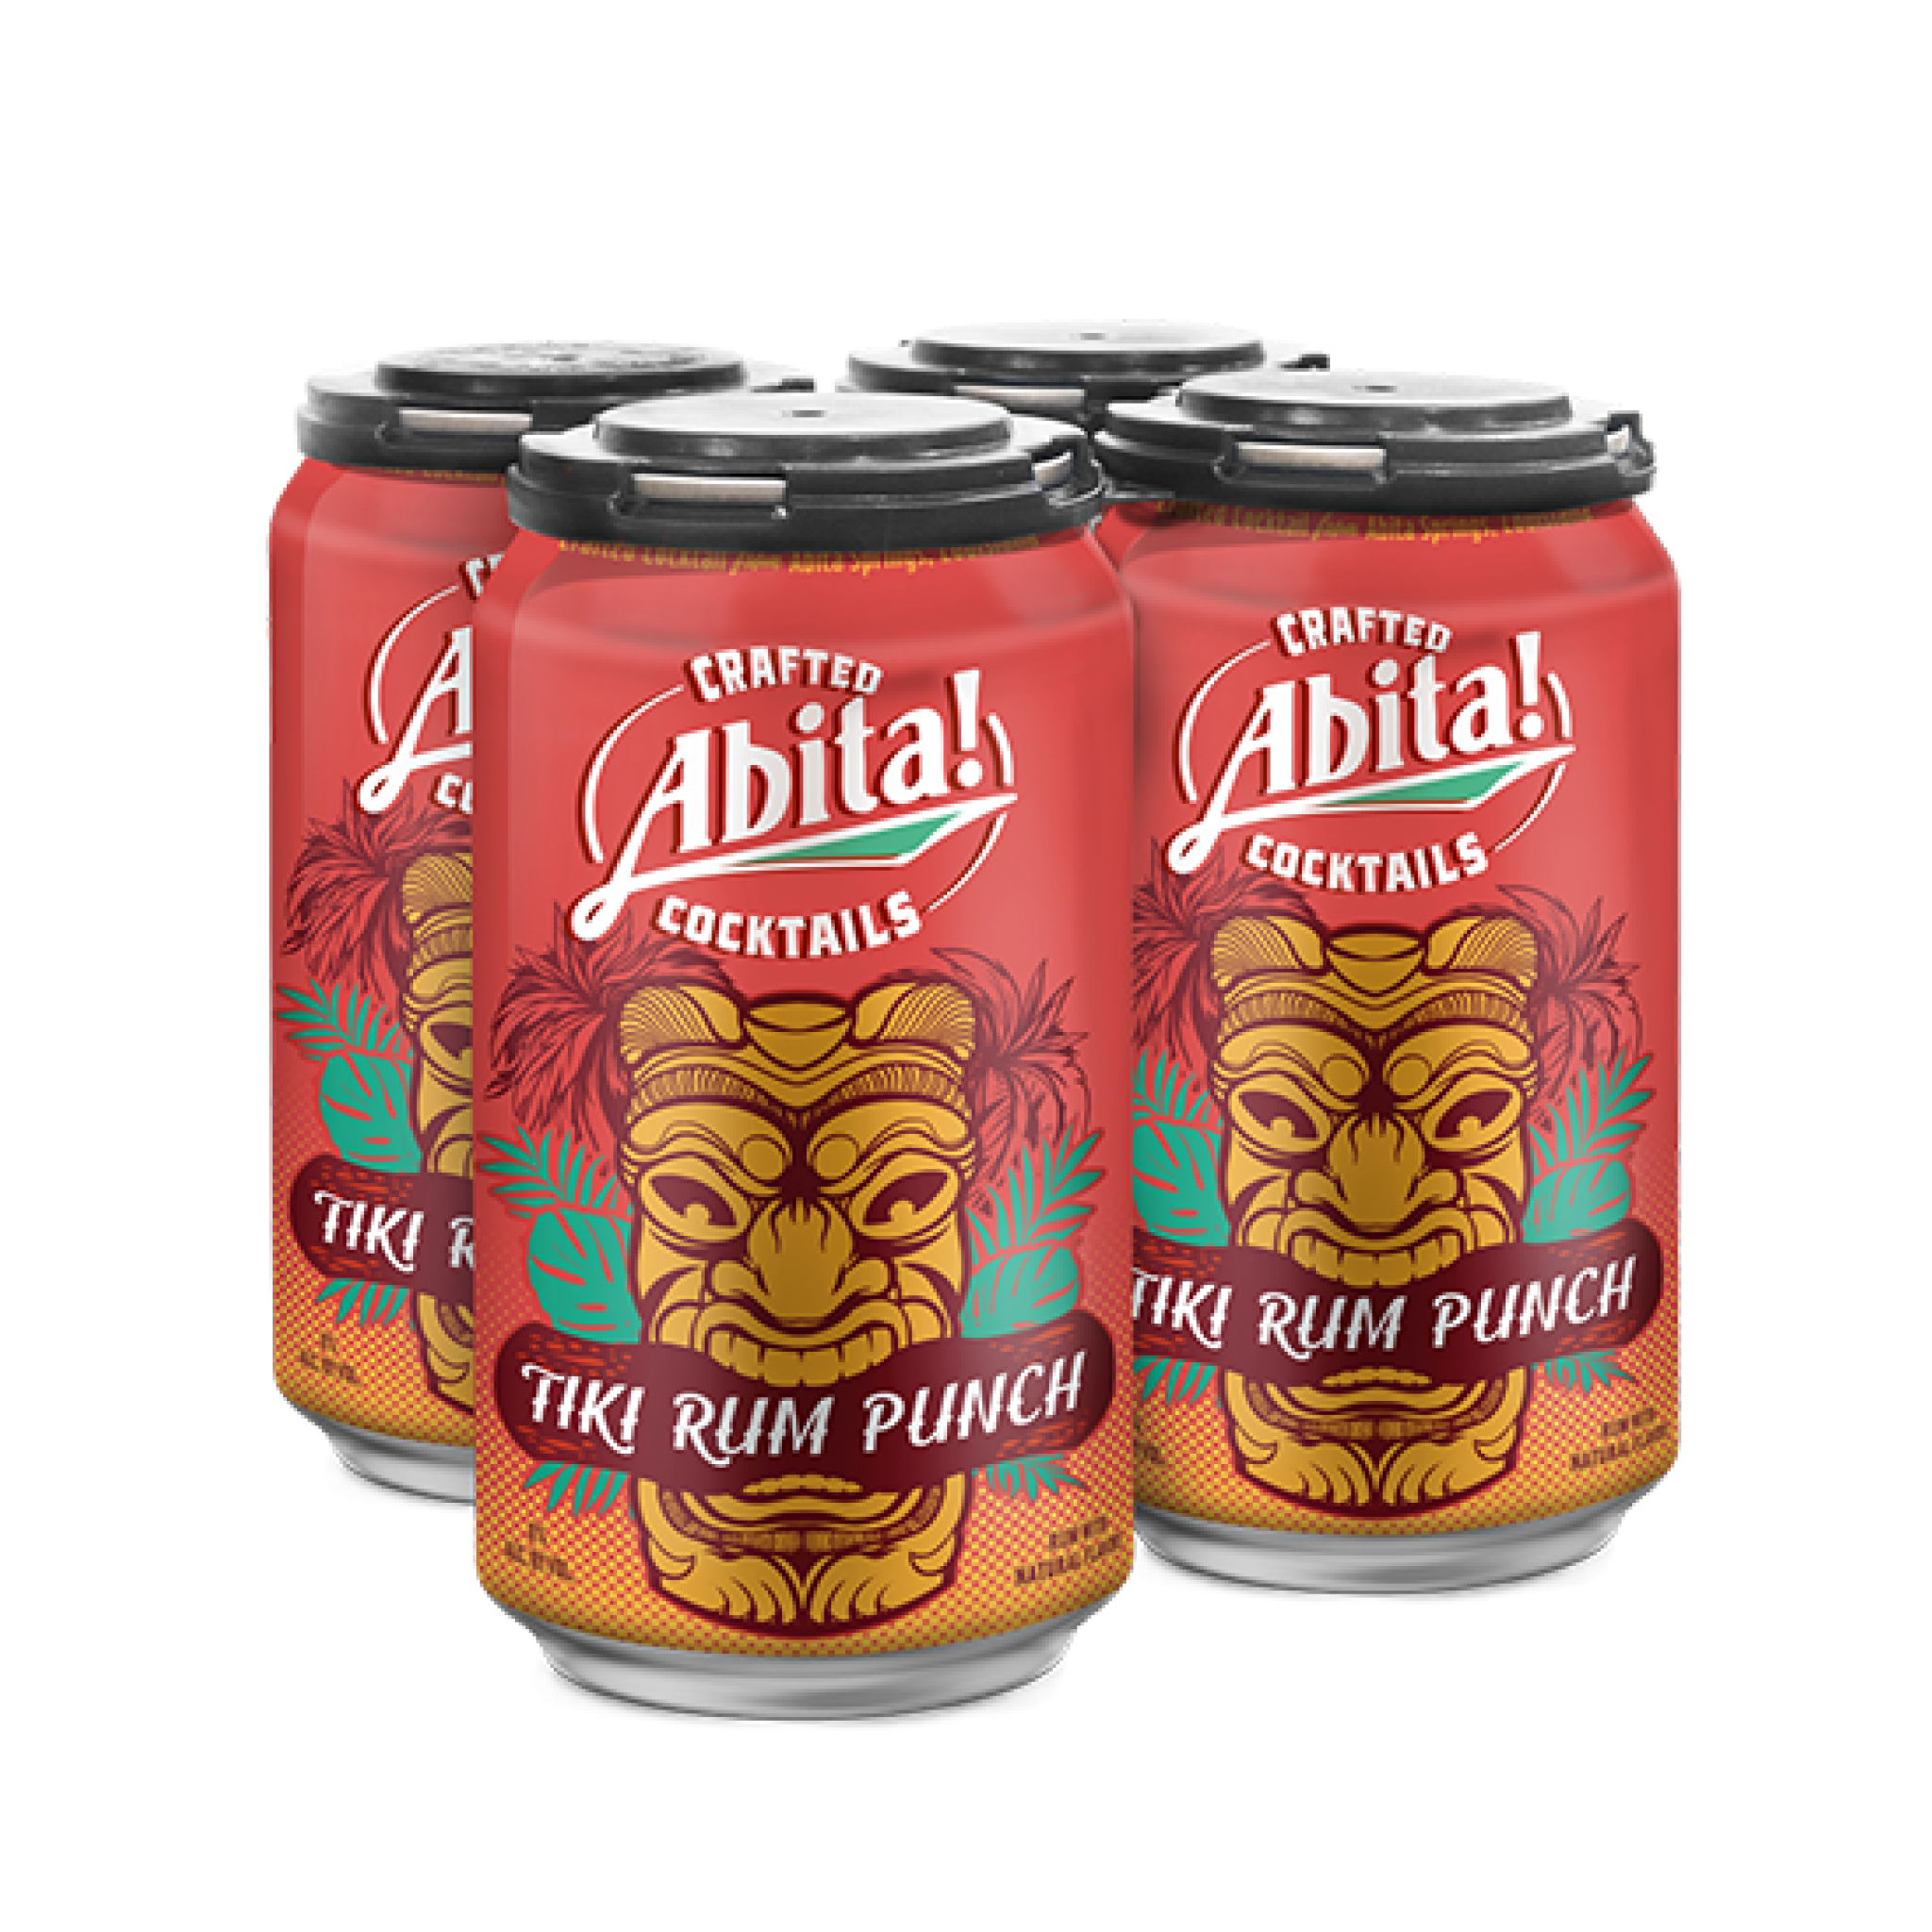 4 pack of Abita Crafted Cocktails, Tiki Rum Punch